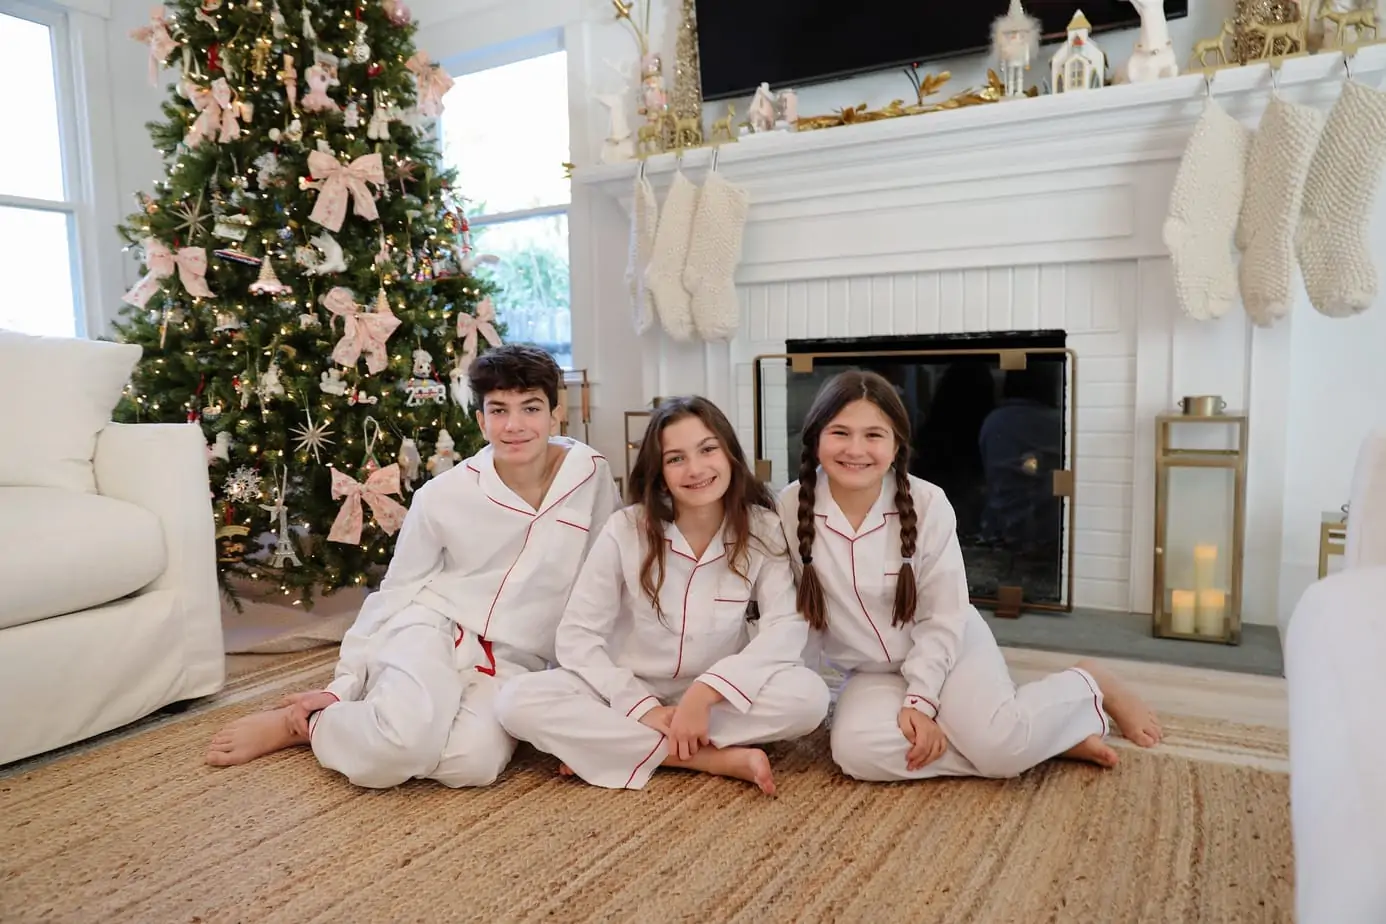 The Matching Family Holiday Pajamas We Love + One That We Bought